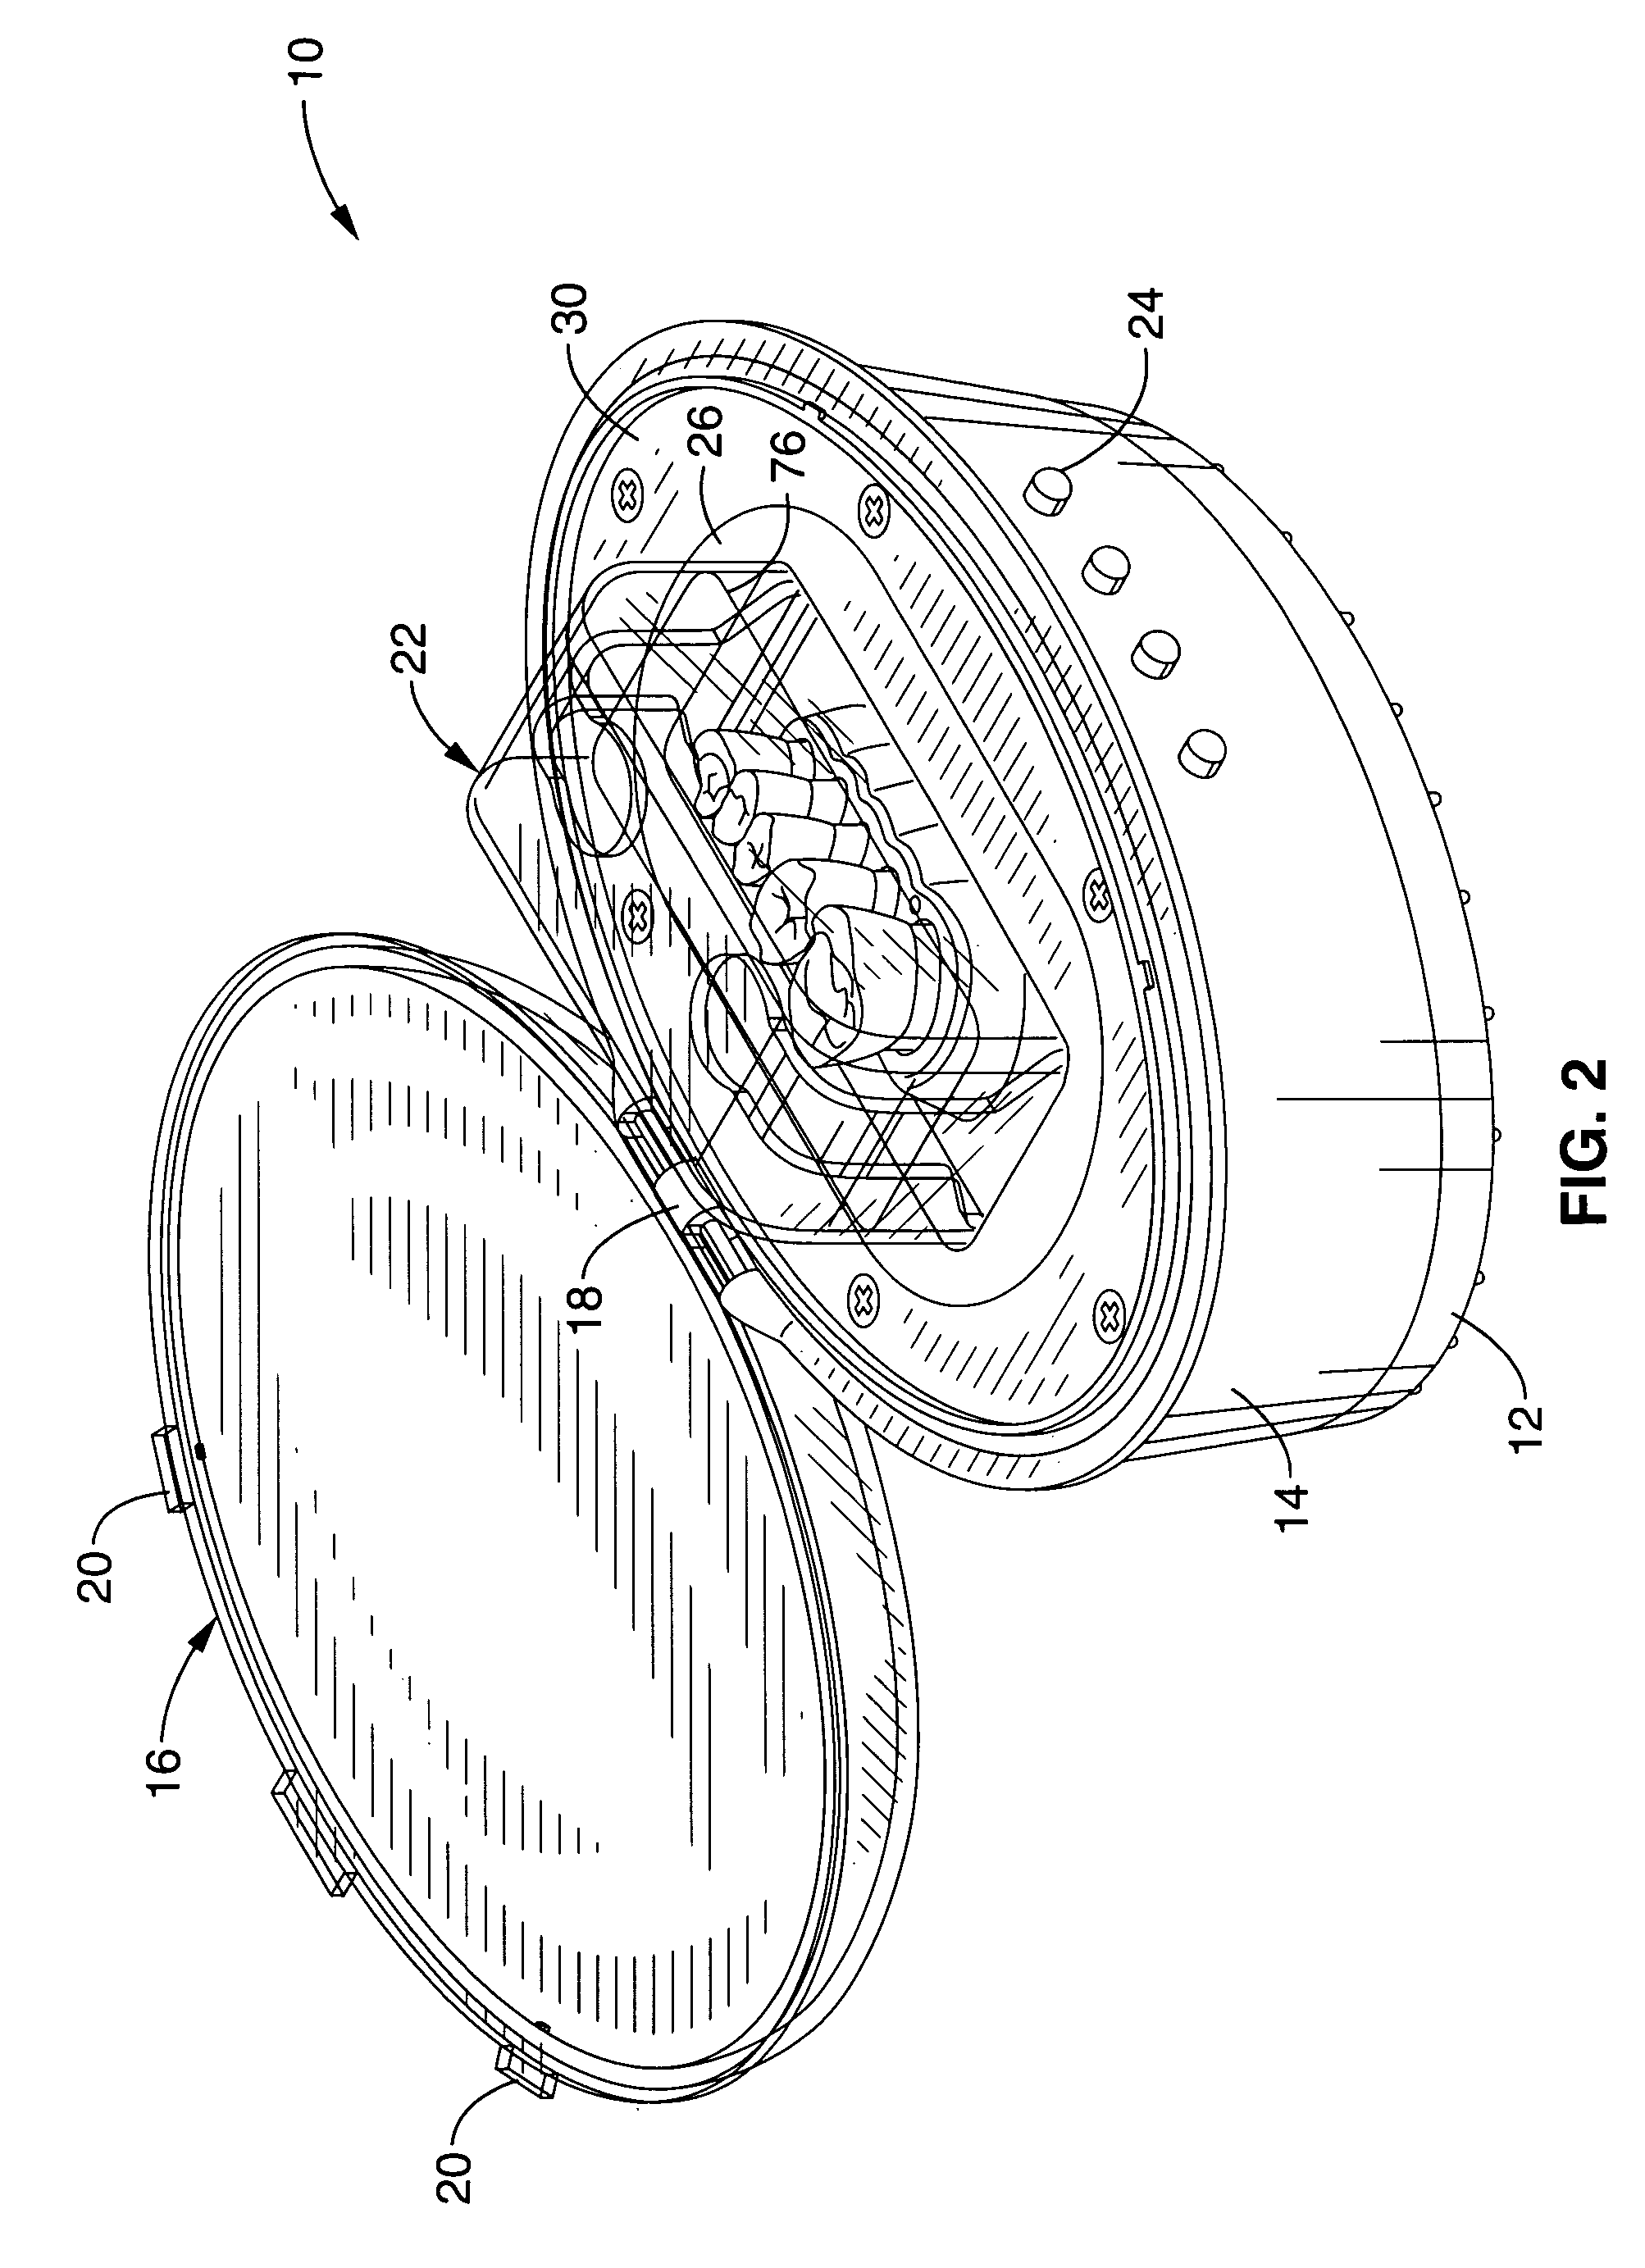 Pod apparatus for education and amusement